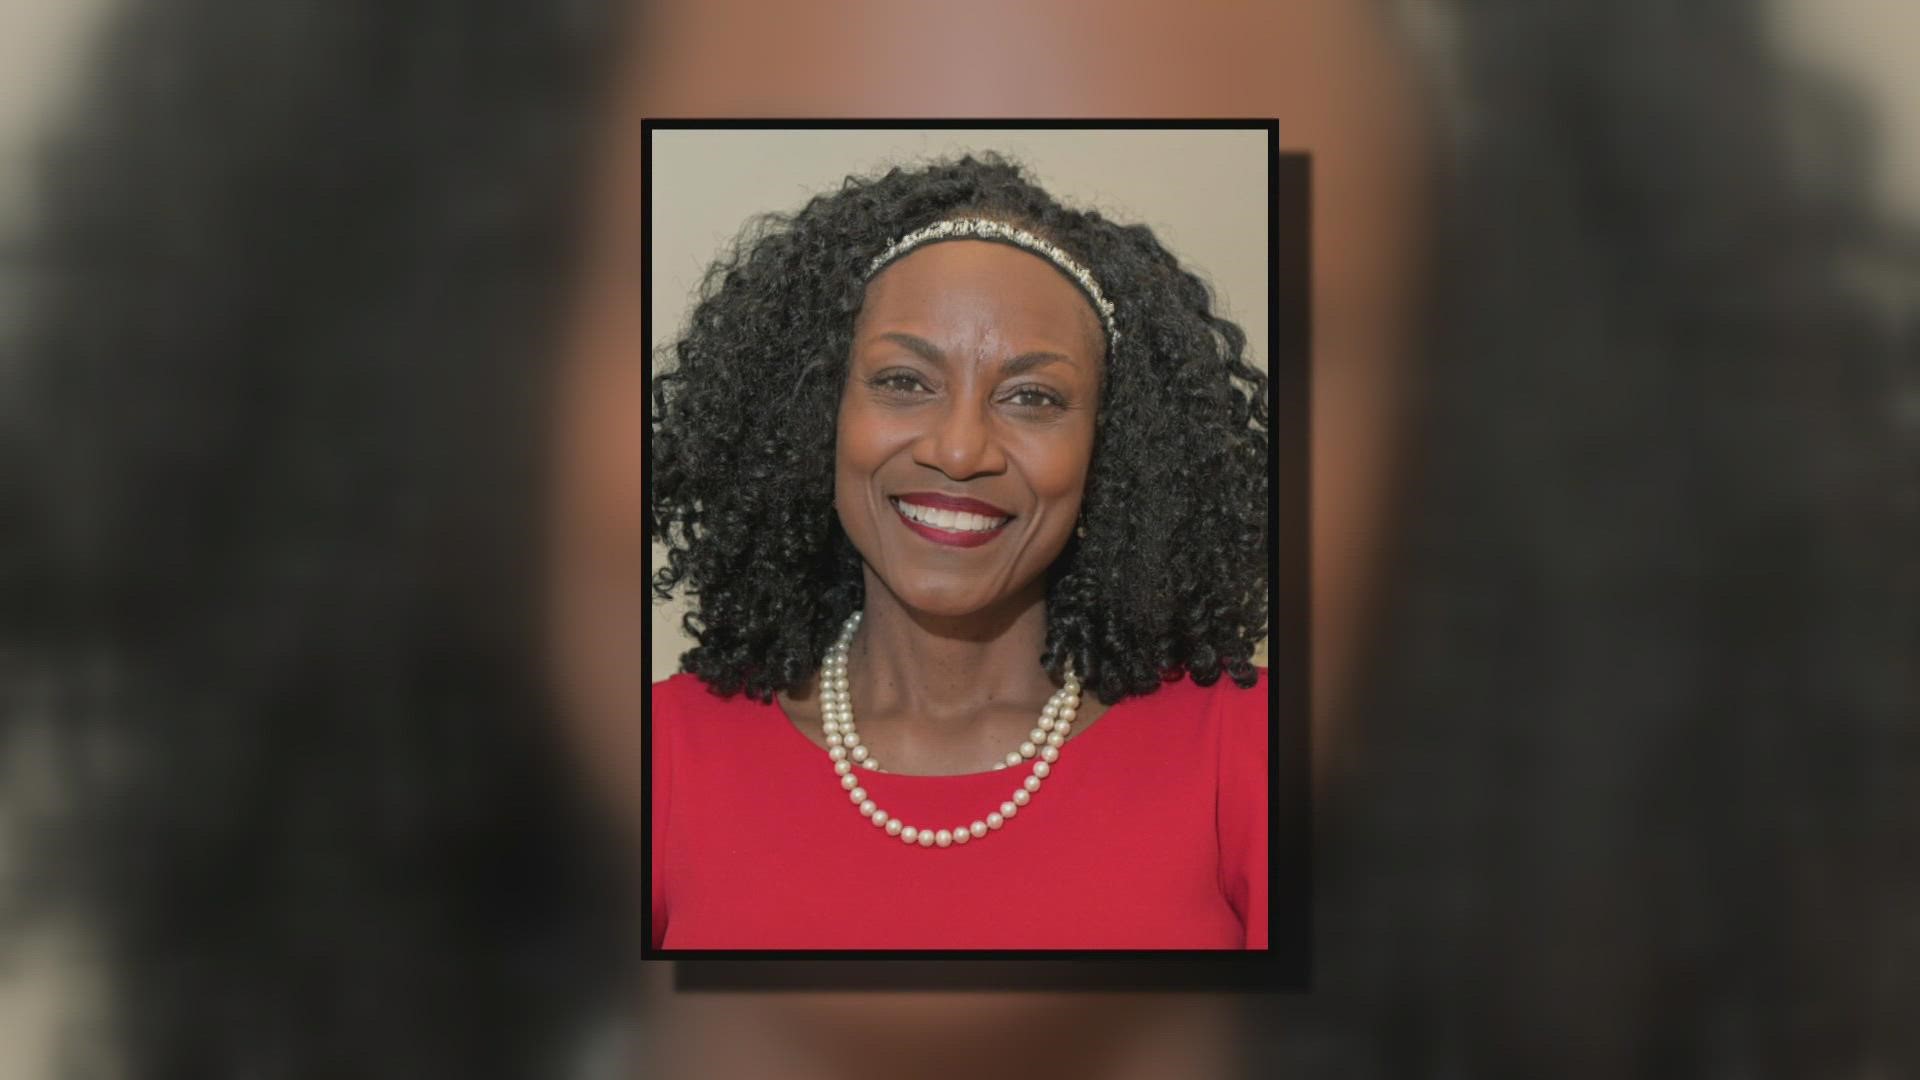 Dr. Avis Williams has become the new Superintendent of the Orleans Parish School Board. The choice is historic as she is the first woman in years in the position.